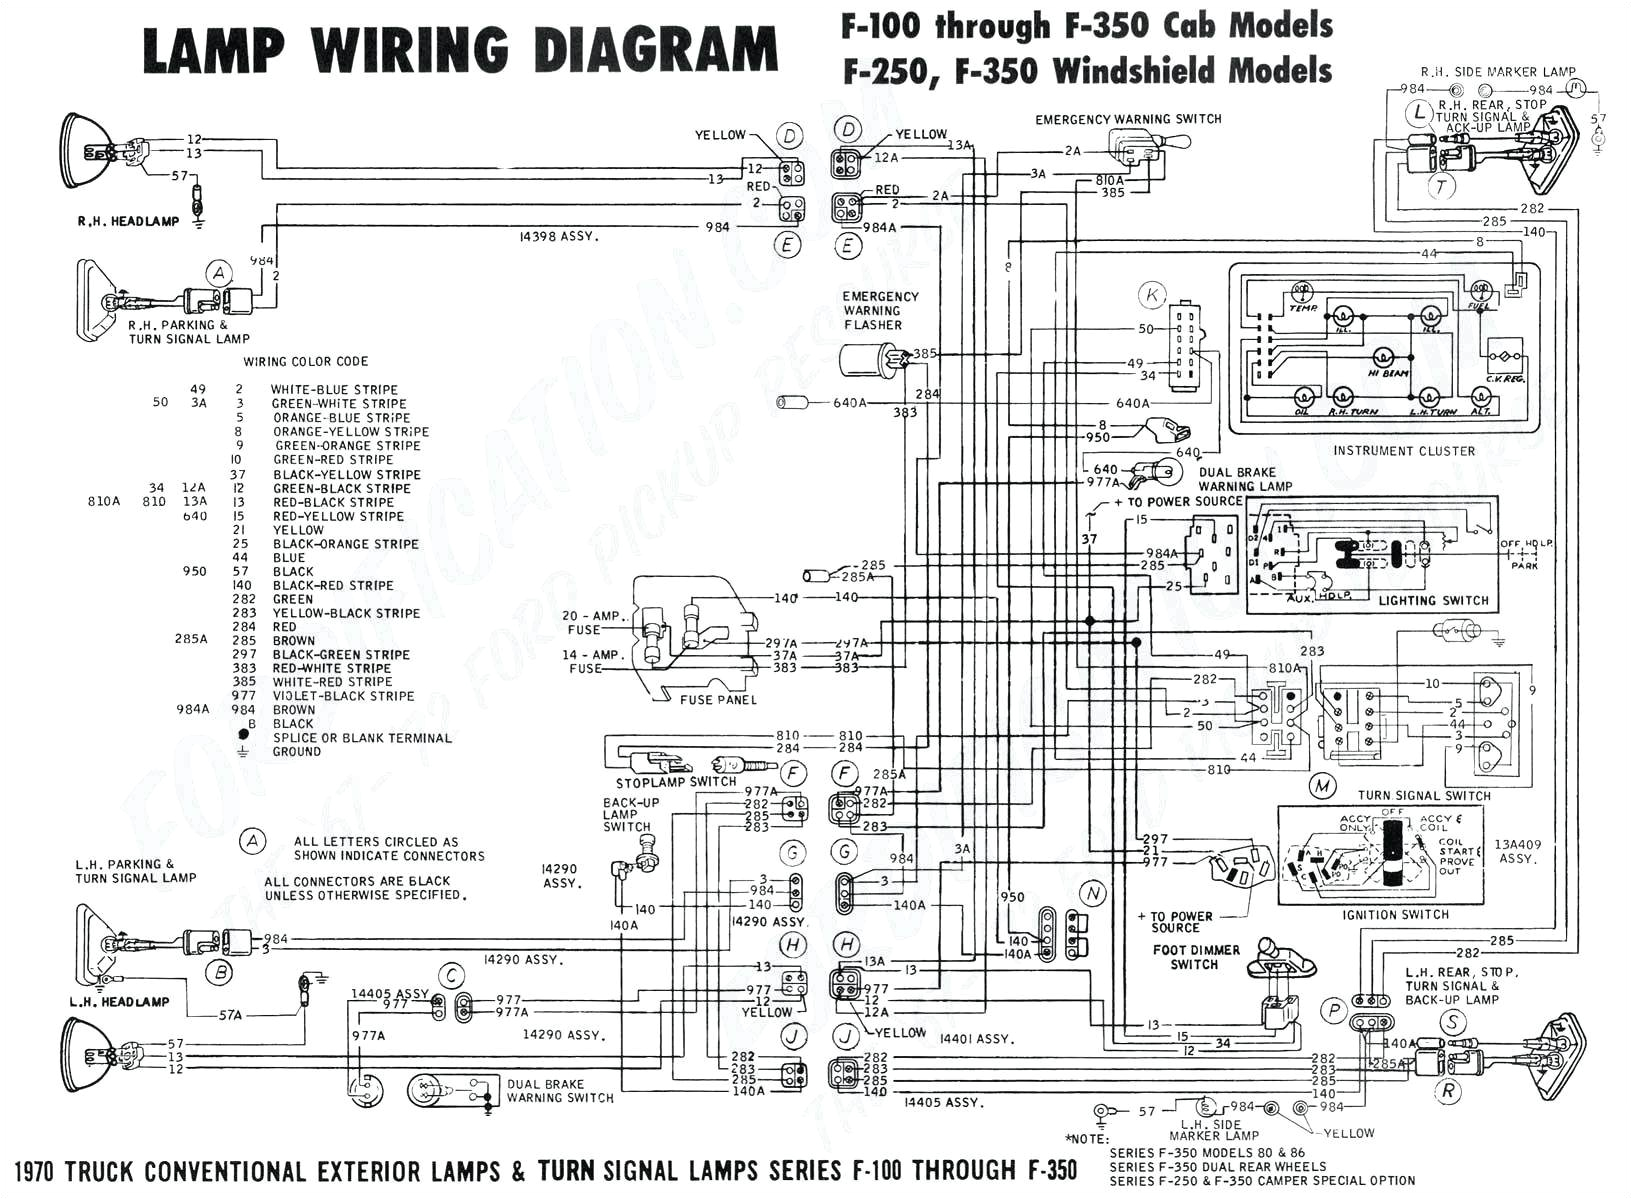 82 ford fairmont stereo wiring color codes data wiring diagram preview 82 ford fairmont stereo wiring color codes